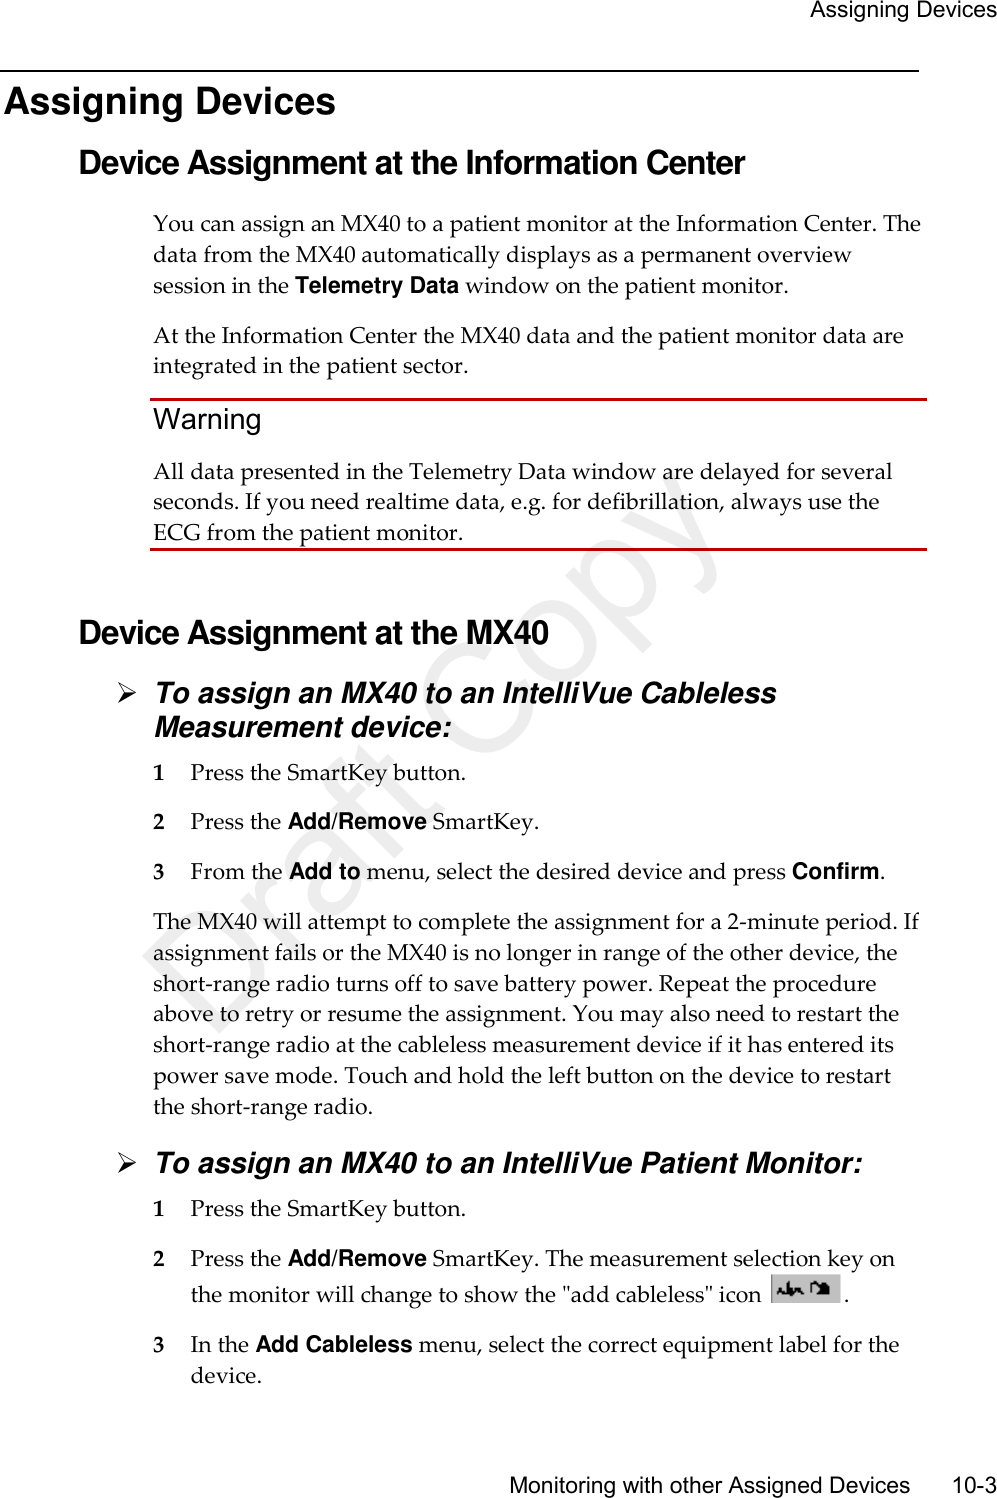     Assigning Devices       Monitoring with other Assigned Devices       10-3 Assigning Devices Device Assignment at the Information Center You can assign an MX40 to a patient monitor at the Information Center. The data from the MX40 automatically displays as a permanent overview session in the Telemetry Data window on the patient monitor.   At the Information Center the MX40 data and the patient monitor data are integrated in the patient sector.   Warning All data presented in the Telemetry Data window are delayed for several seconds. If you need realtime data, e.g. for defibrillation, always use the ECG from the patient monitor.   Device Assignment at the MX40  To assign an MX40 to an IntelliVue Cableless Measurement device: 1 Press the SmartKey button. 2 Press the Add/Remove SmartKey. 3 From the Add to menu, select the desired device and press Confirm. The MX40 will attempt to complete the assignment for a 2-minute period. If assignment fails or the MX40 is no longer in range of the other device, the short-range radio turns off to save battery power. Repeat the procedure above to retry or resume the assignment. You may also need to restart the short-range radio at the cableless measurement device if it has entered its power save mode. Touch and hold the left button on the device to restart the short-range radio.  To assign an MX40 to an IntelliVue Patient Monitor: 1 Press the SmartKey button. 2 Press the Add/Remove SmartKey. The measurement selection key on the monitor will change to show the &quot;add cableless&quot; icon  . 3 In the Add Cableless menu, select the correct equipment label for the device. Draft Copy